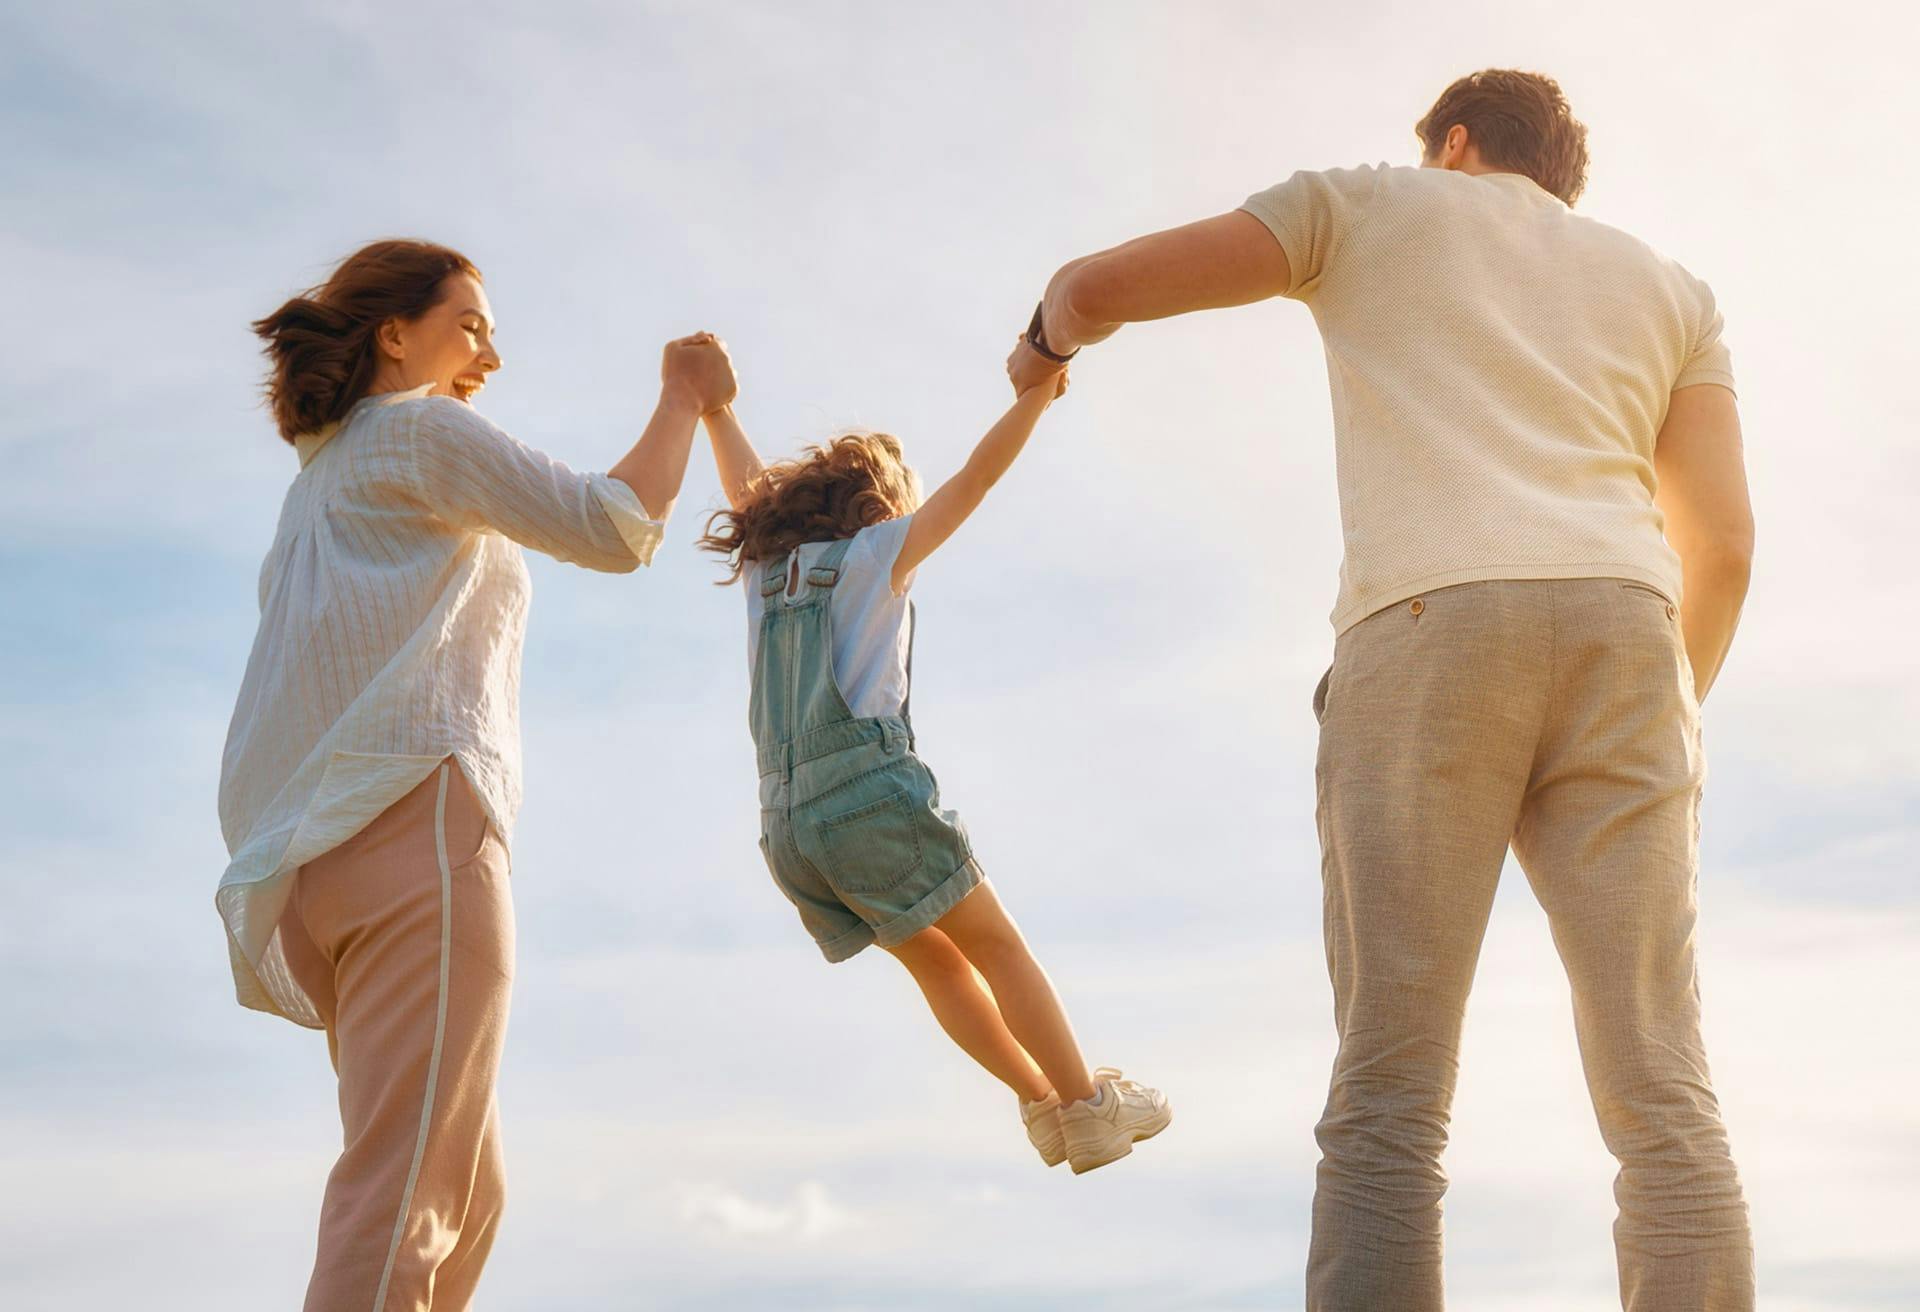 Parents smiling and lifting Daughter by her arms